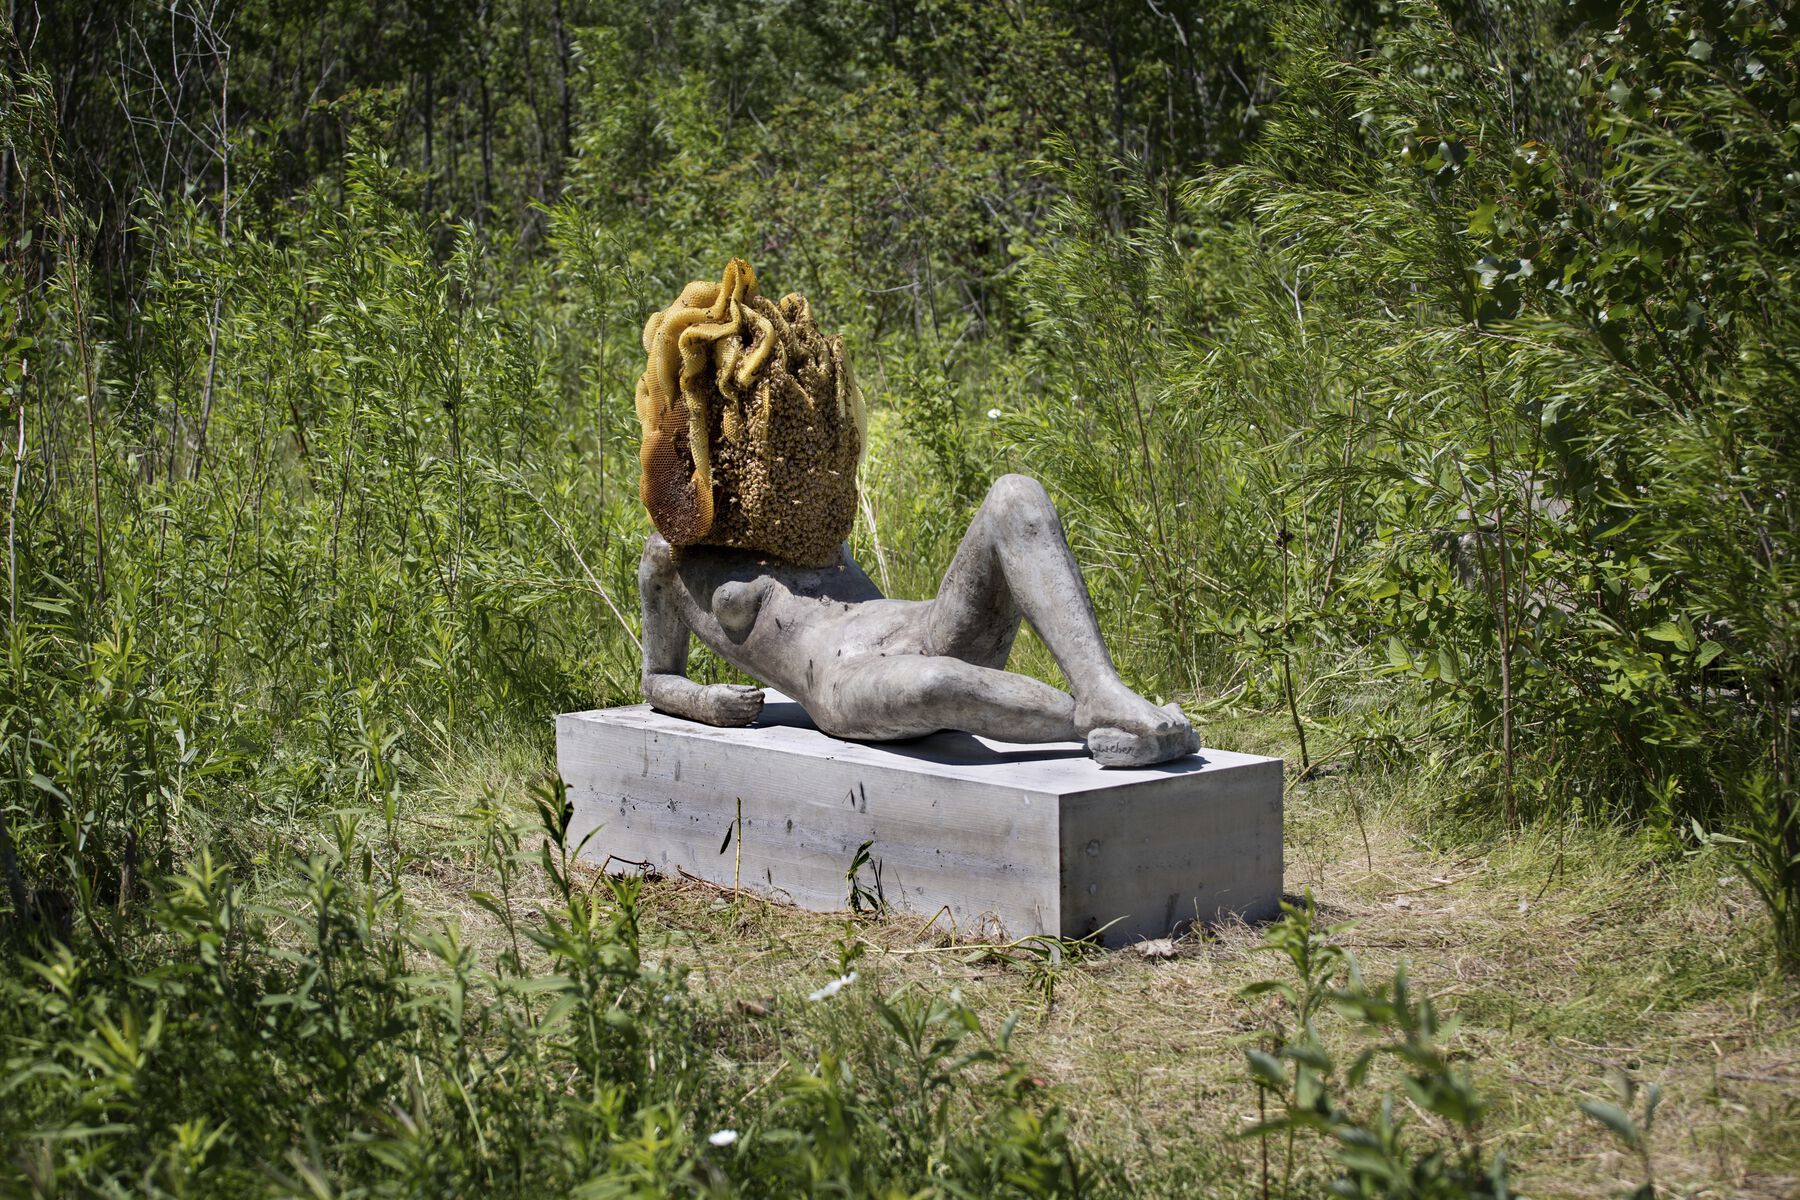 A figure sculpture with a beehive as a head display in the middle of a green foliage